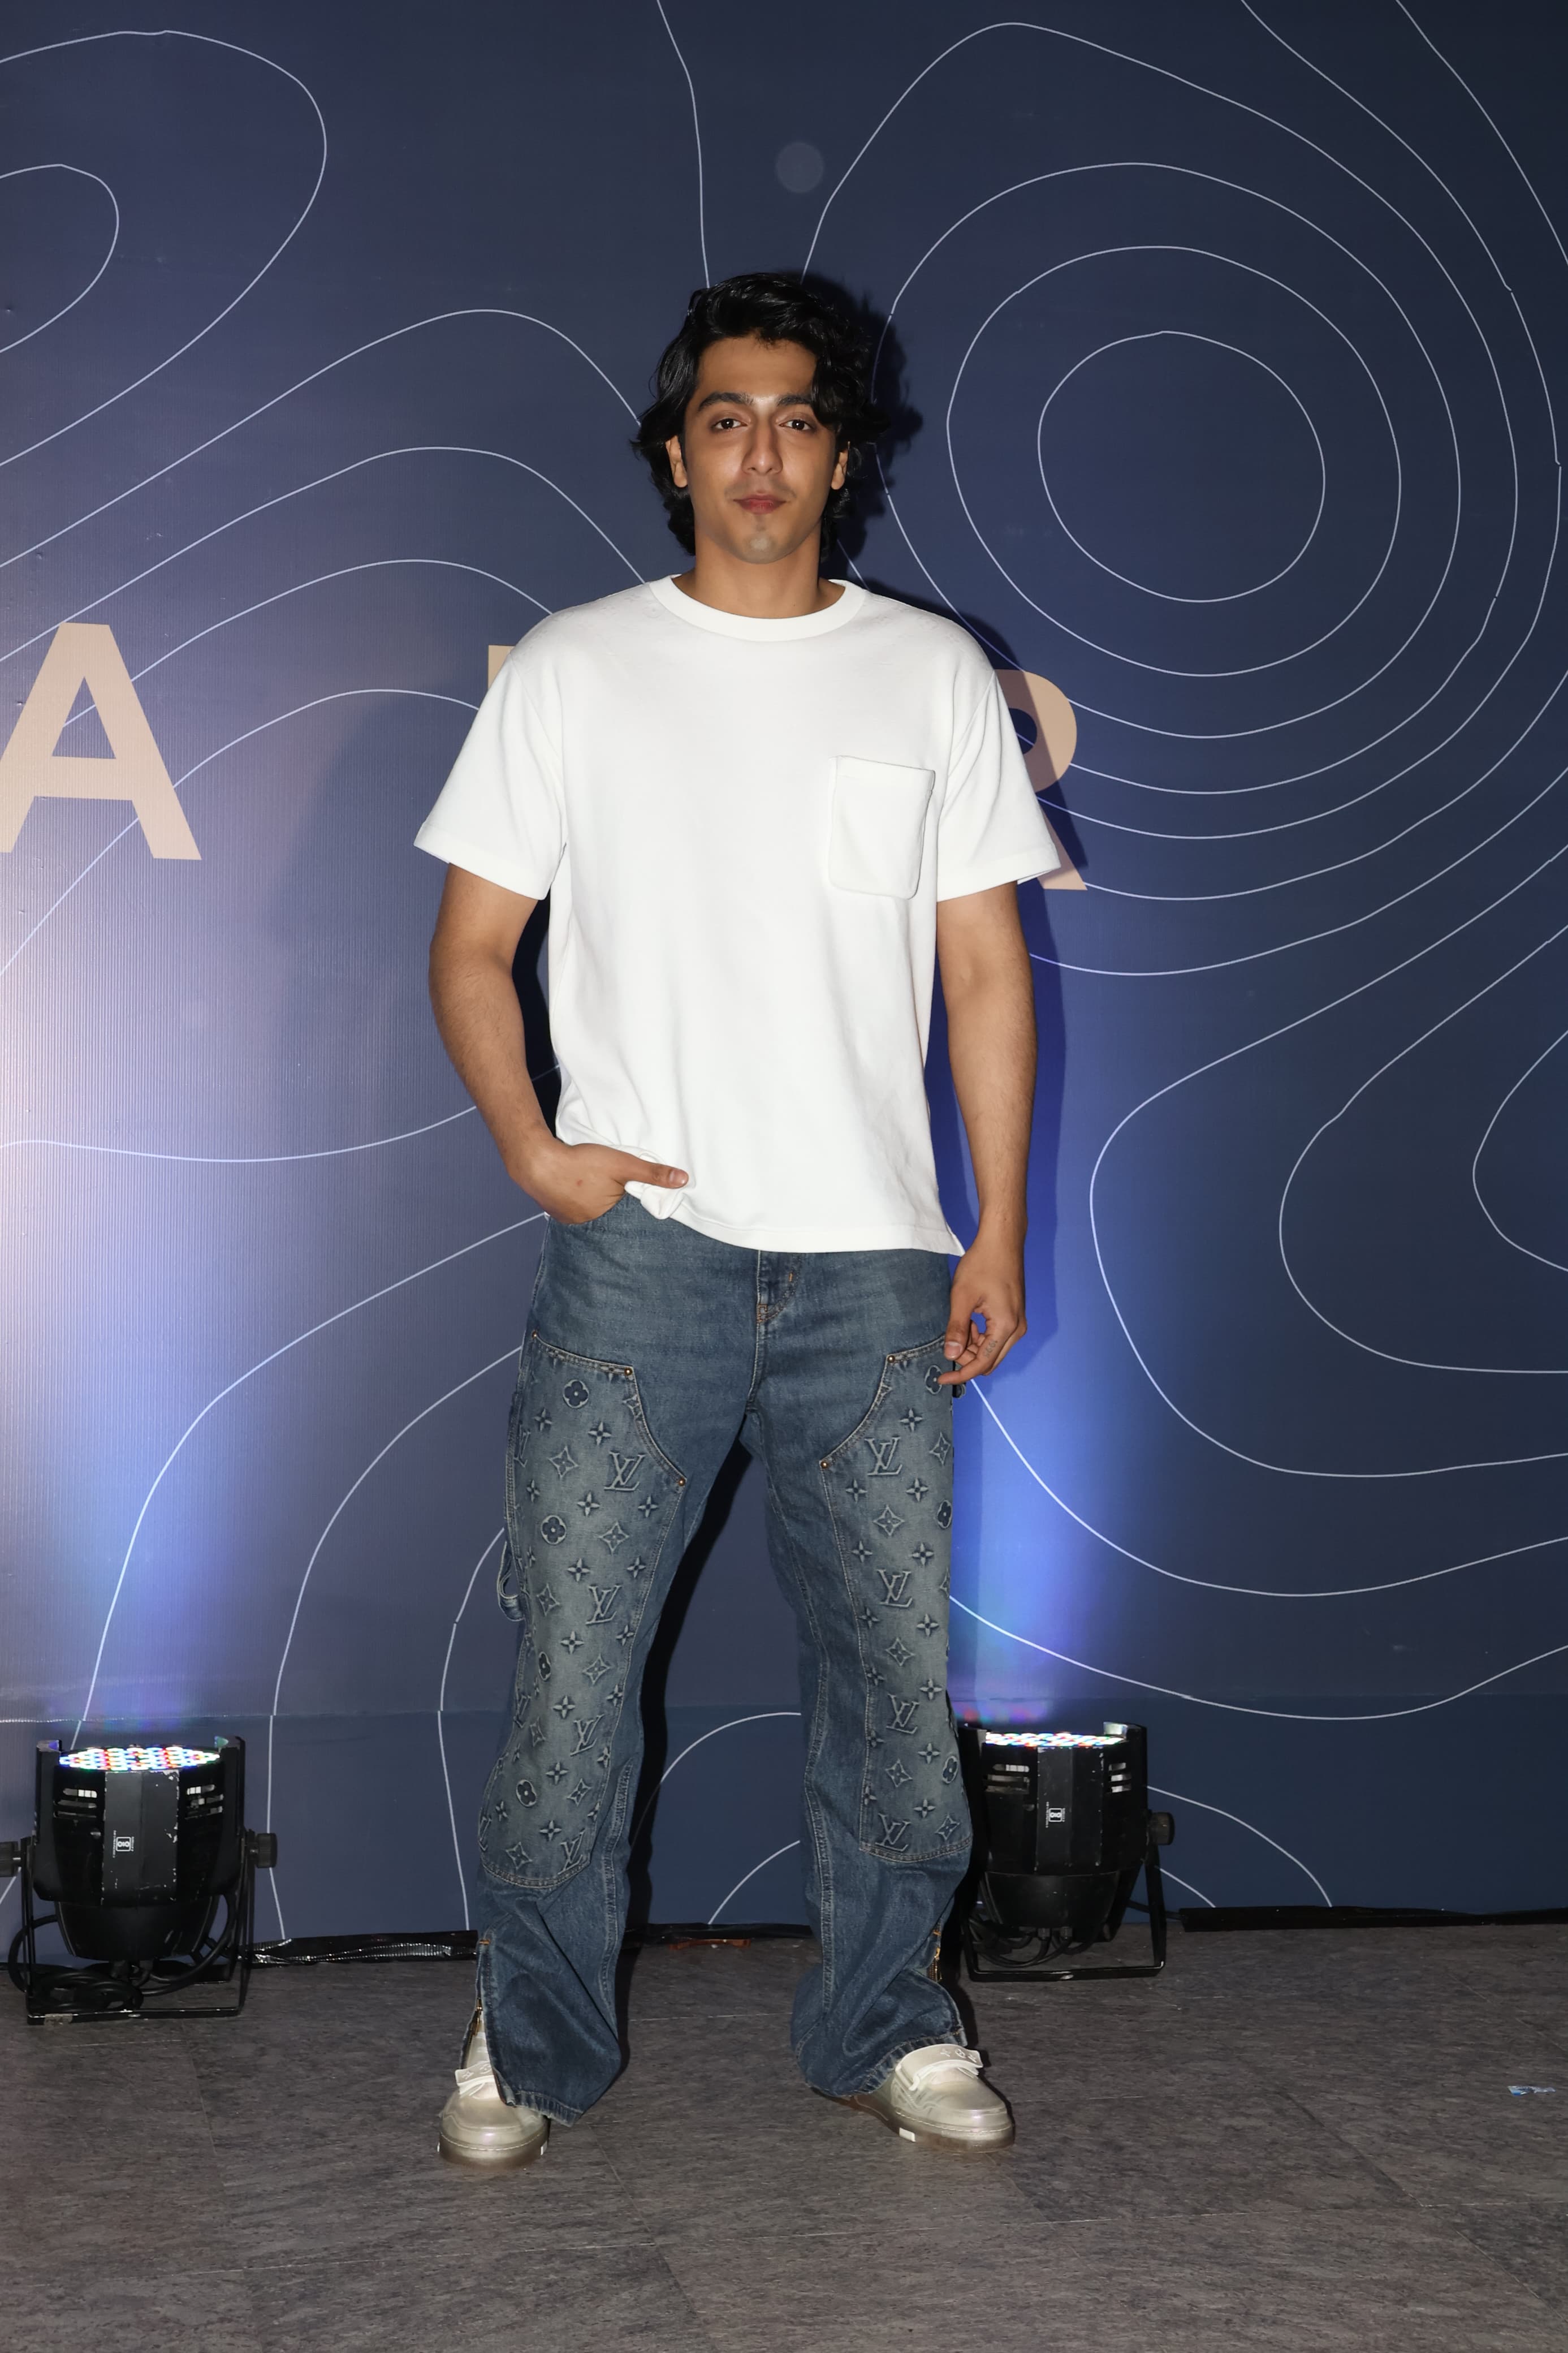 Ahaan Panday showed up at the party in a casual outfit which comprised of a white t-shirt and jeans